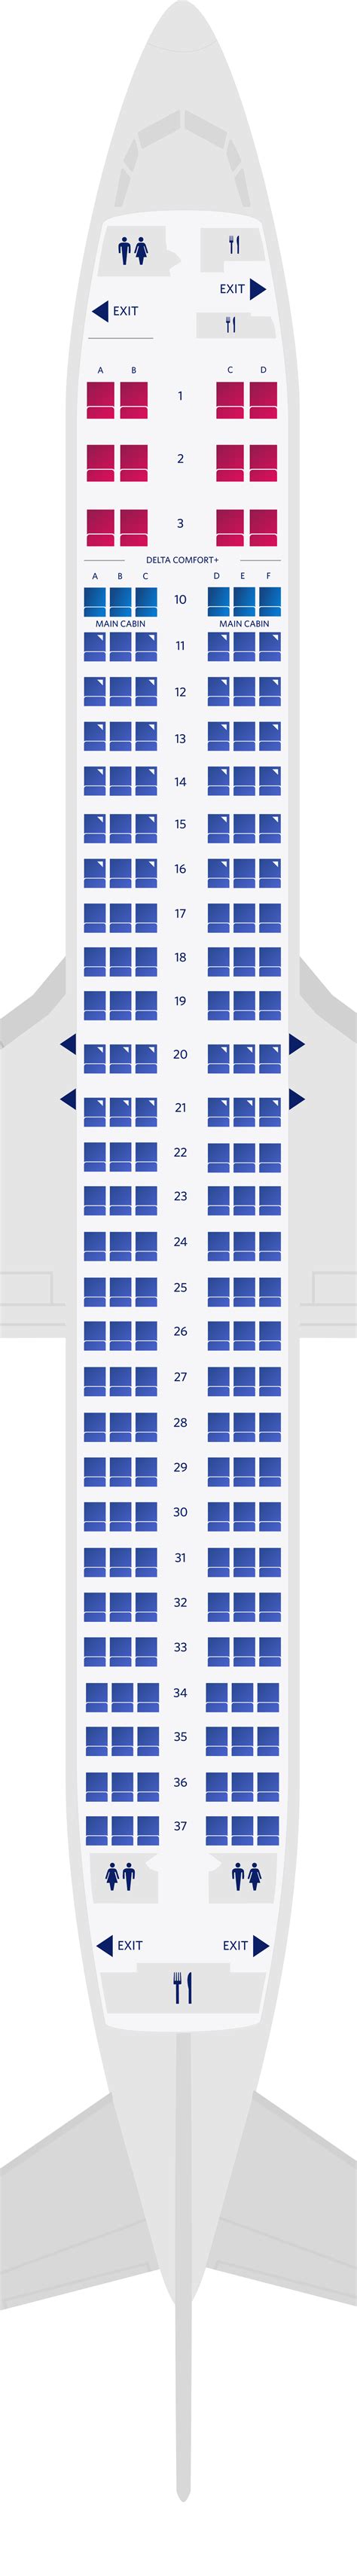 Delta seat map 737. 21. Economy. Standard seat. 30 -31. 17.3. 14-37. 139. Find the best seat wiht our Delta Air Lines Boeing 737-900ER (739) seating chart. Use this seat map to get the most comfortable seats, legroom and recline before booking. 